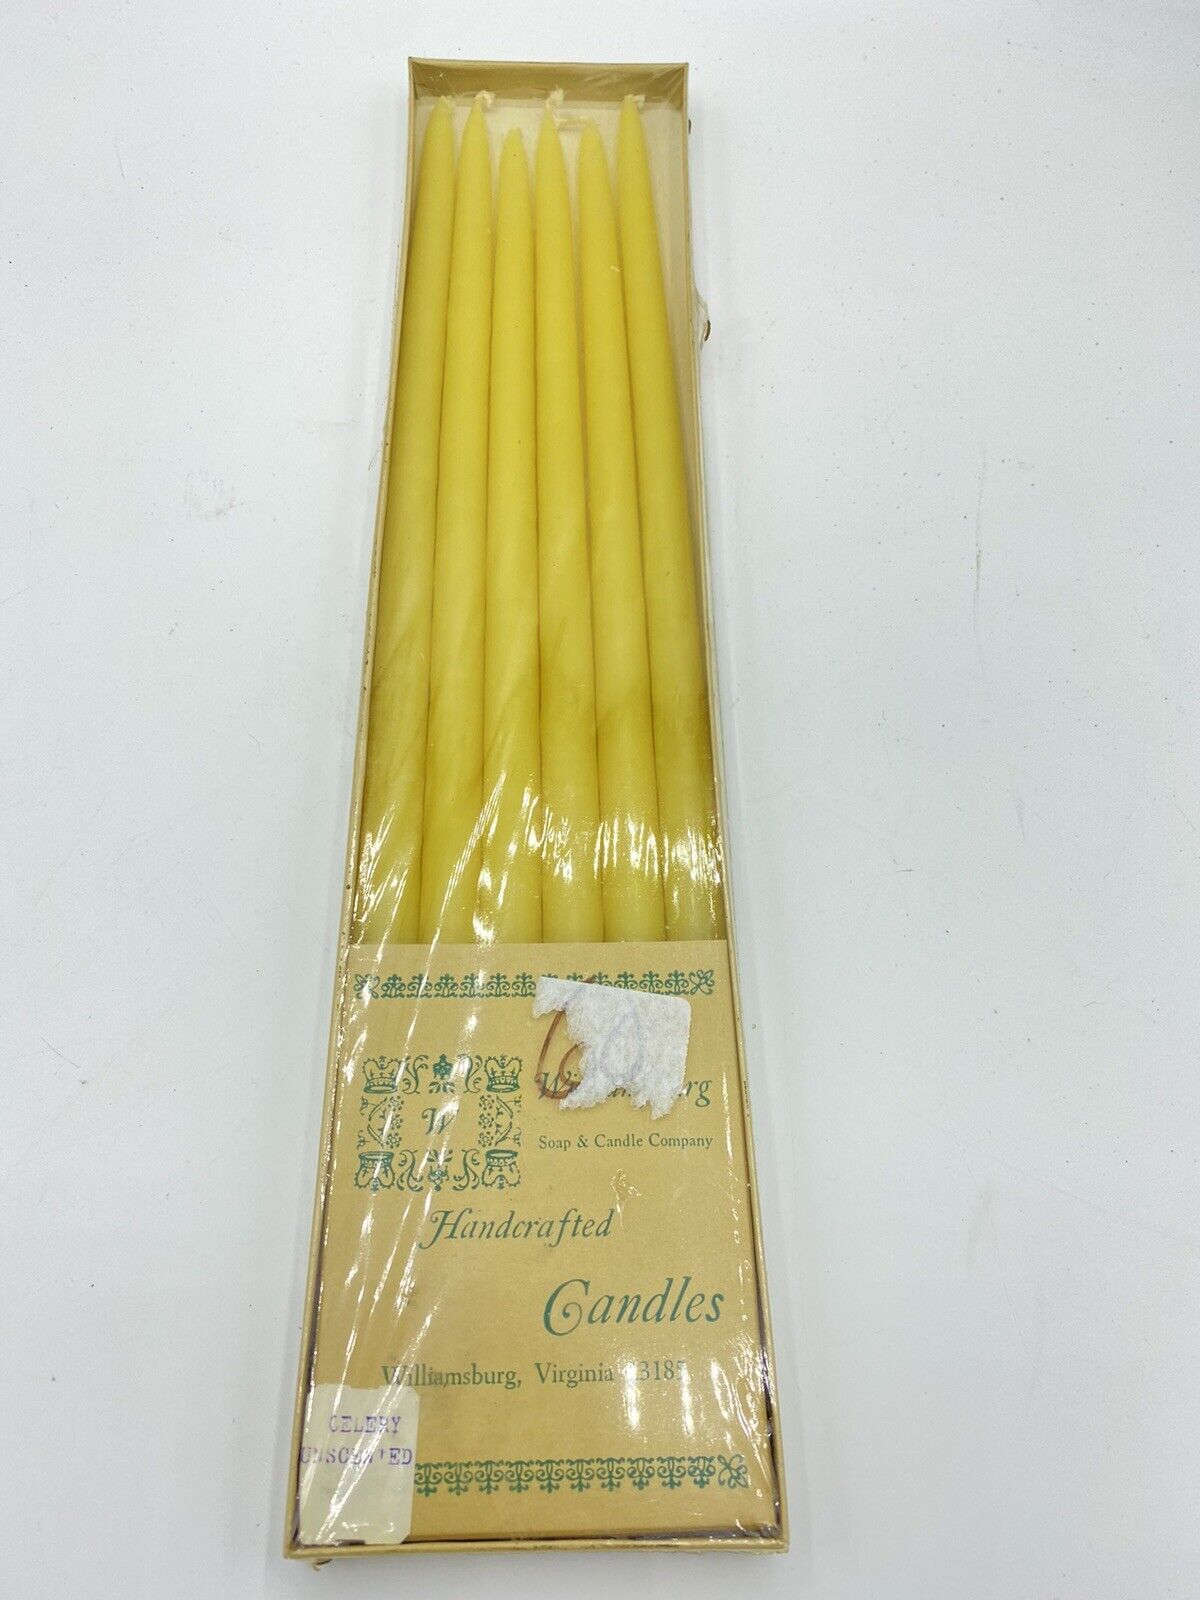 Vintage Williamsburg Soap & Candle Co Handcrafted Slim Yellow Tapers Six